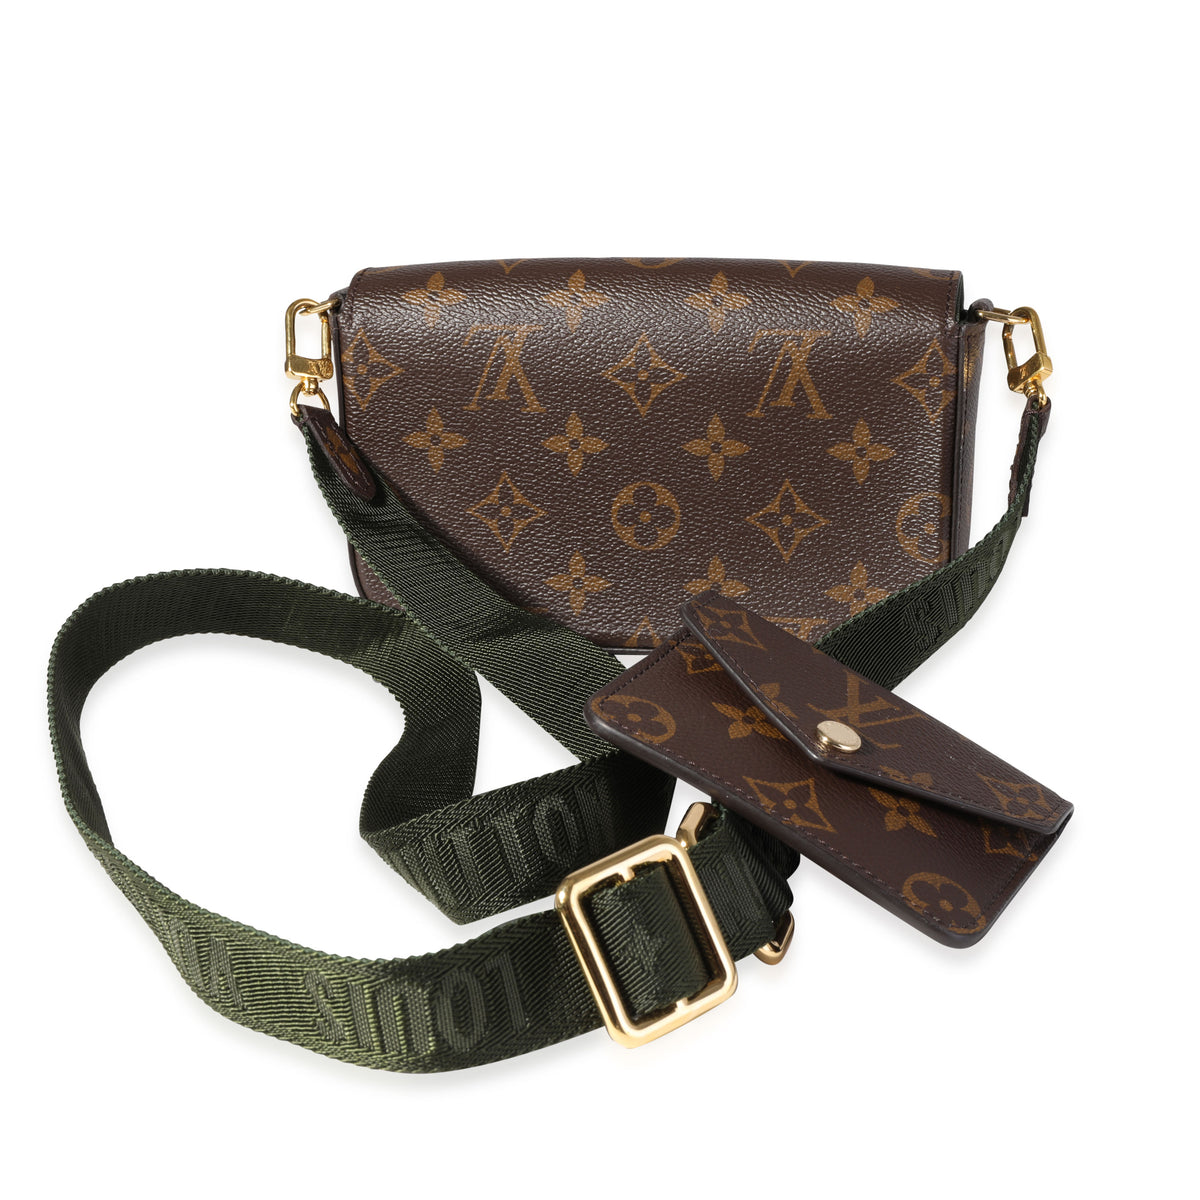 LOUIS VUITTON FELICIE STRAP AND GO - REVIEW AFTER 5 MONTHS OF